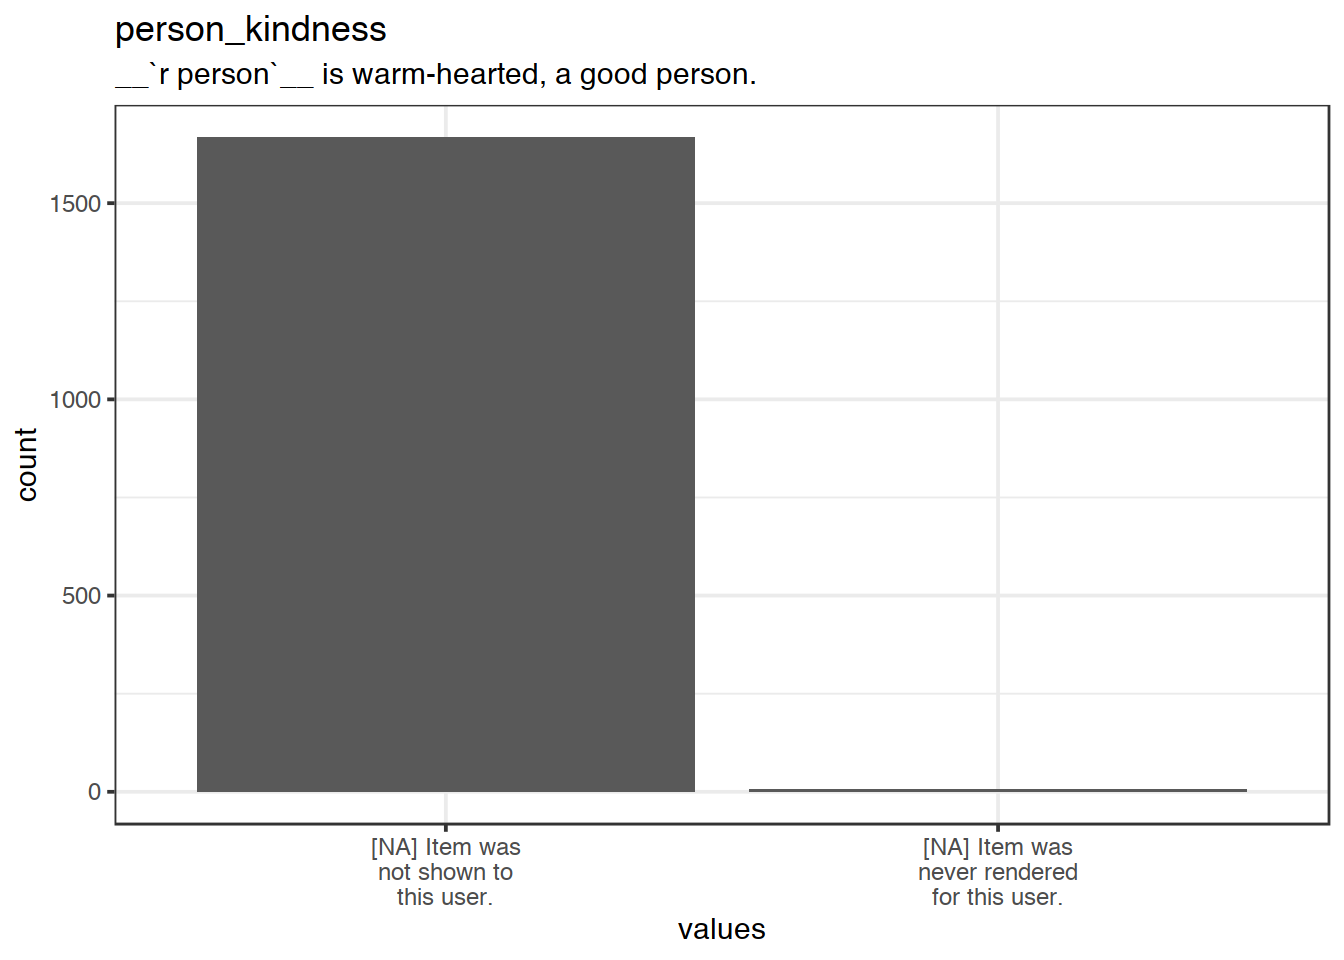 Plot of missing values for person_kindness